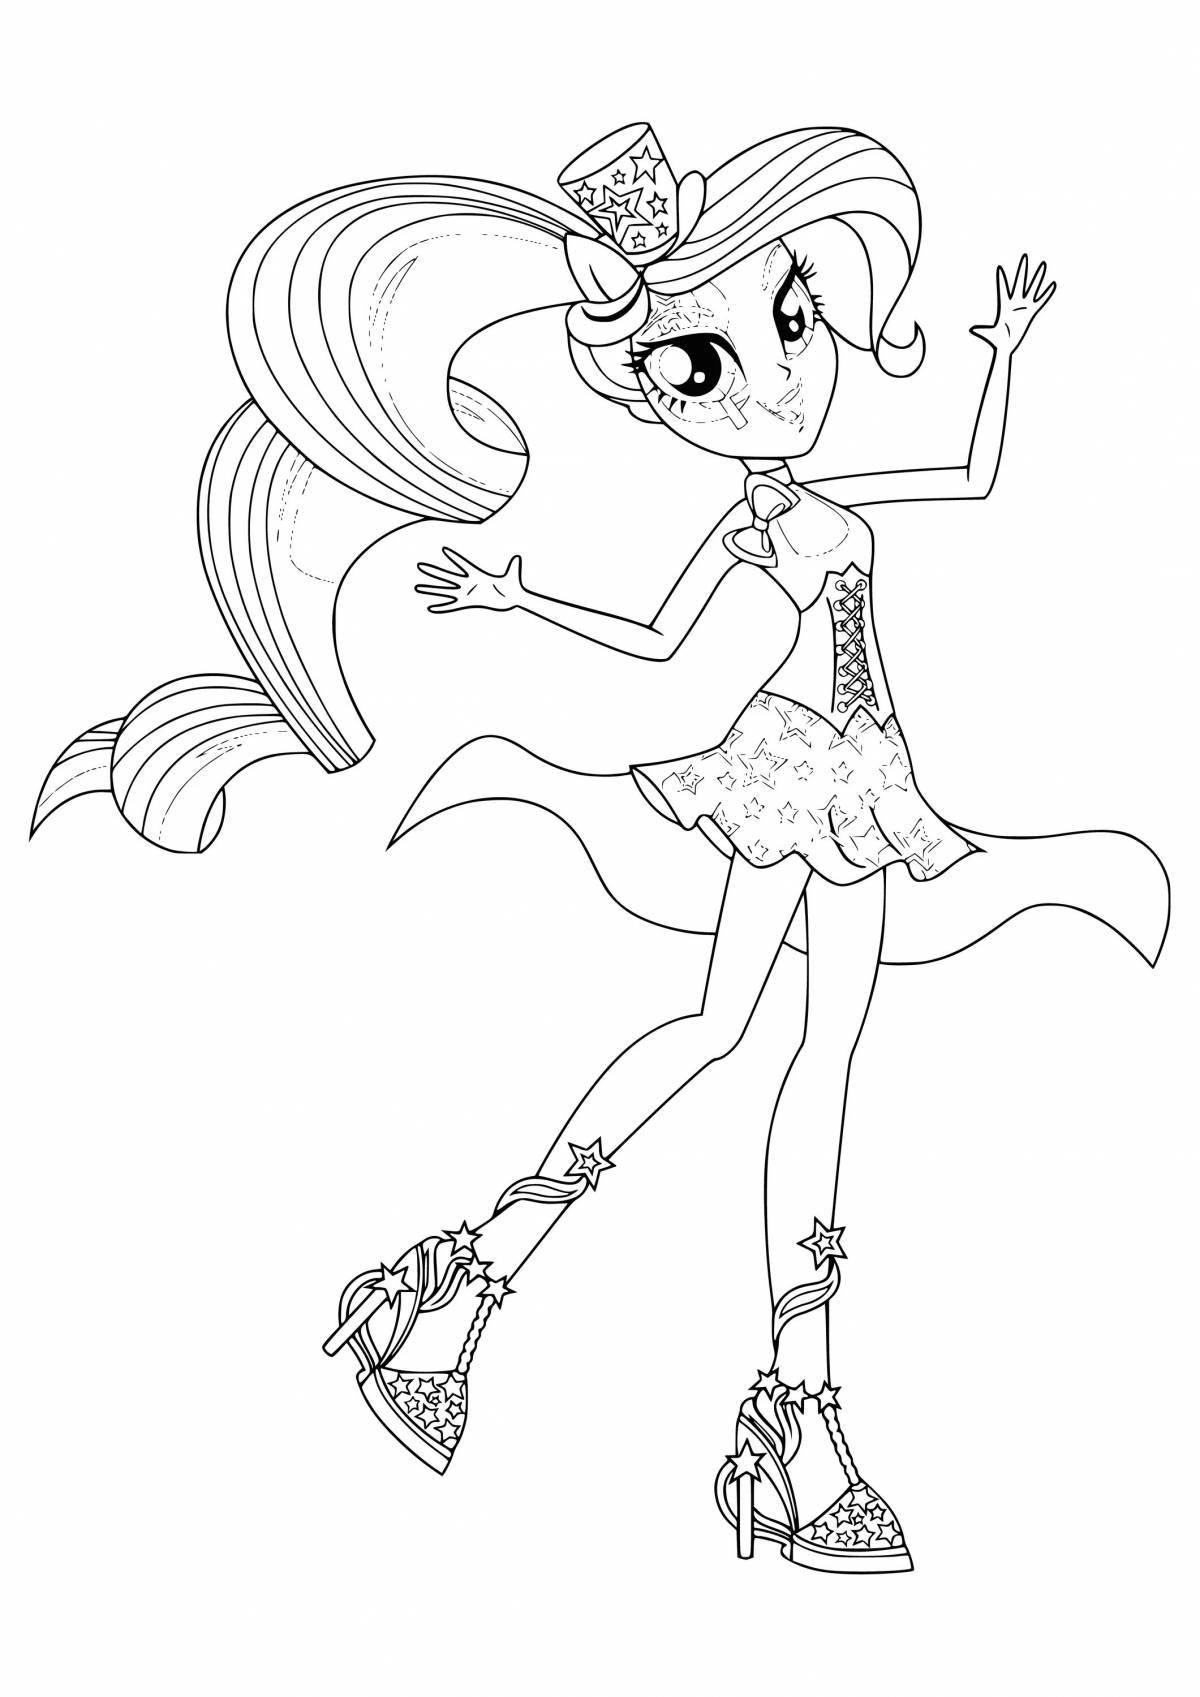 Playful equestria girls coloring page